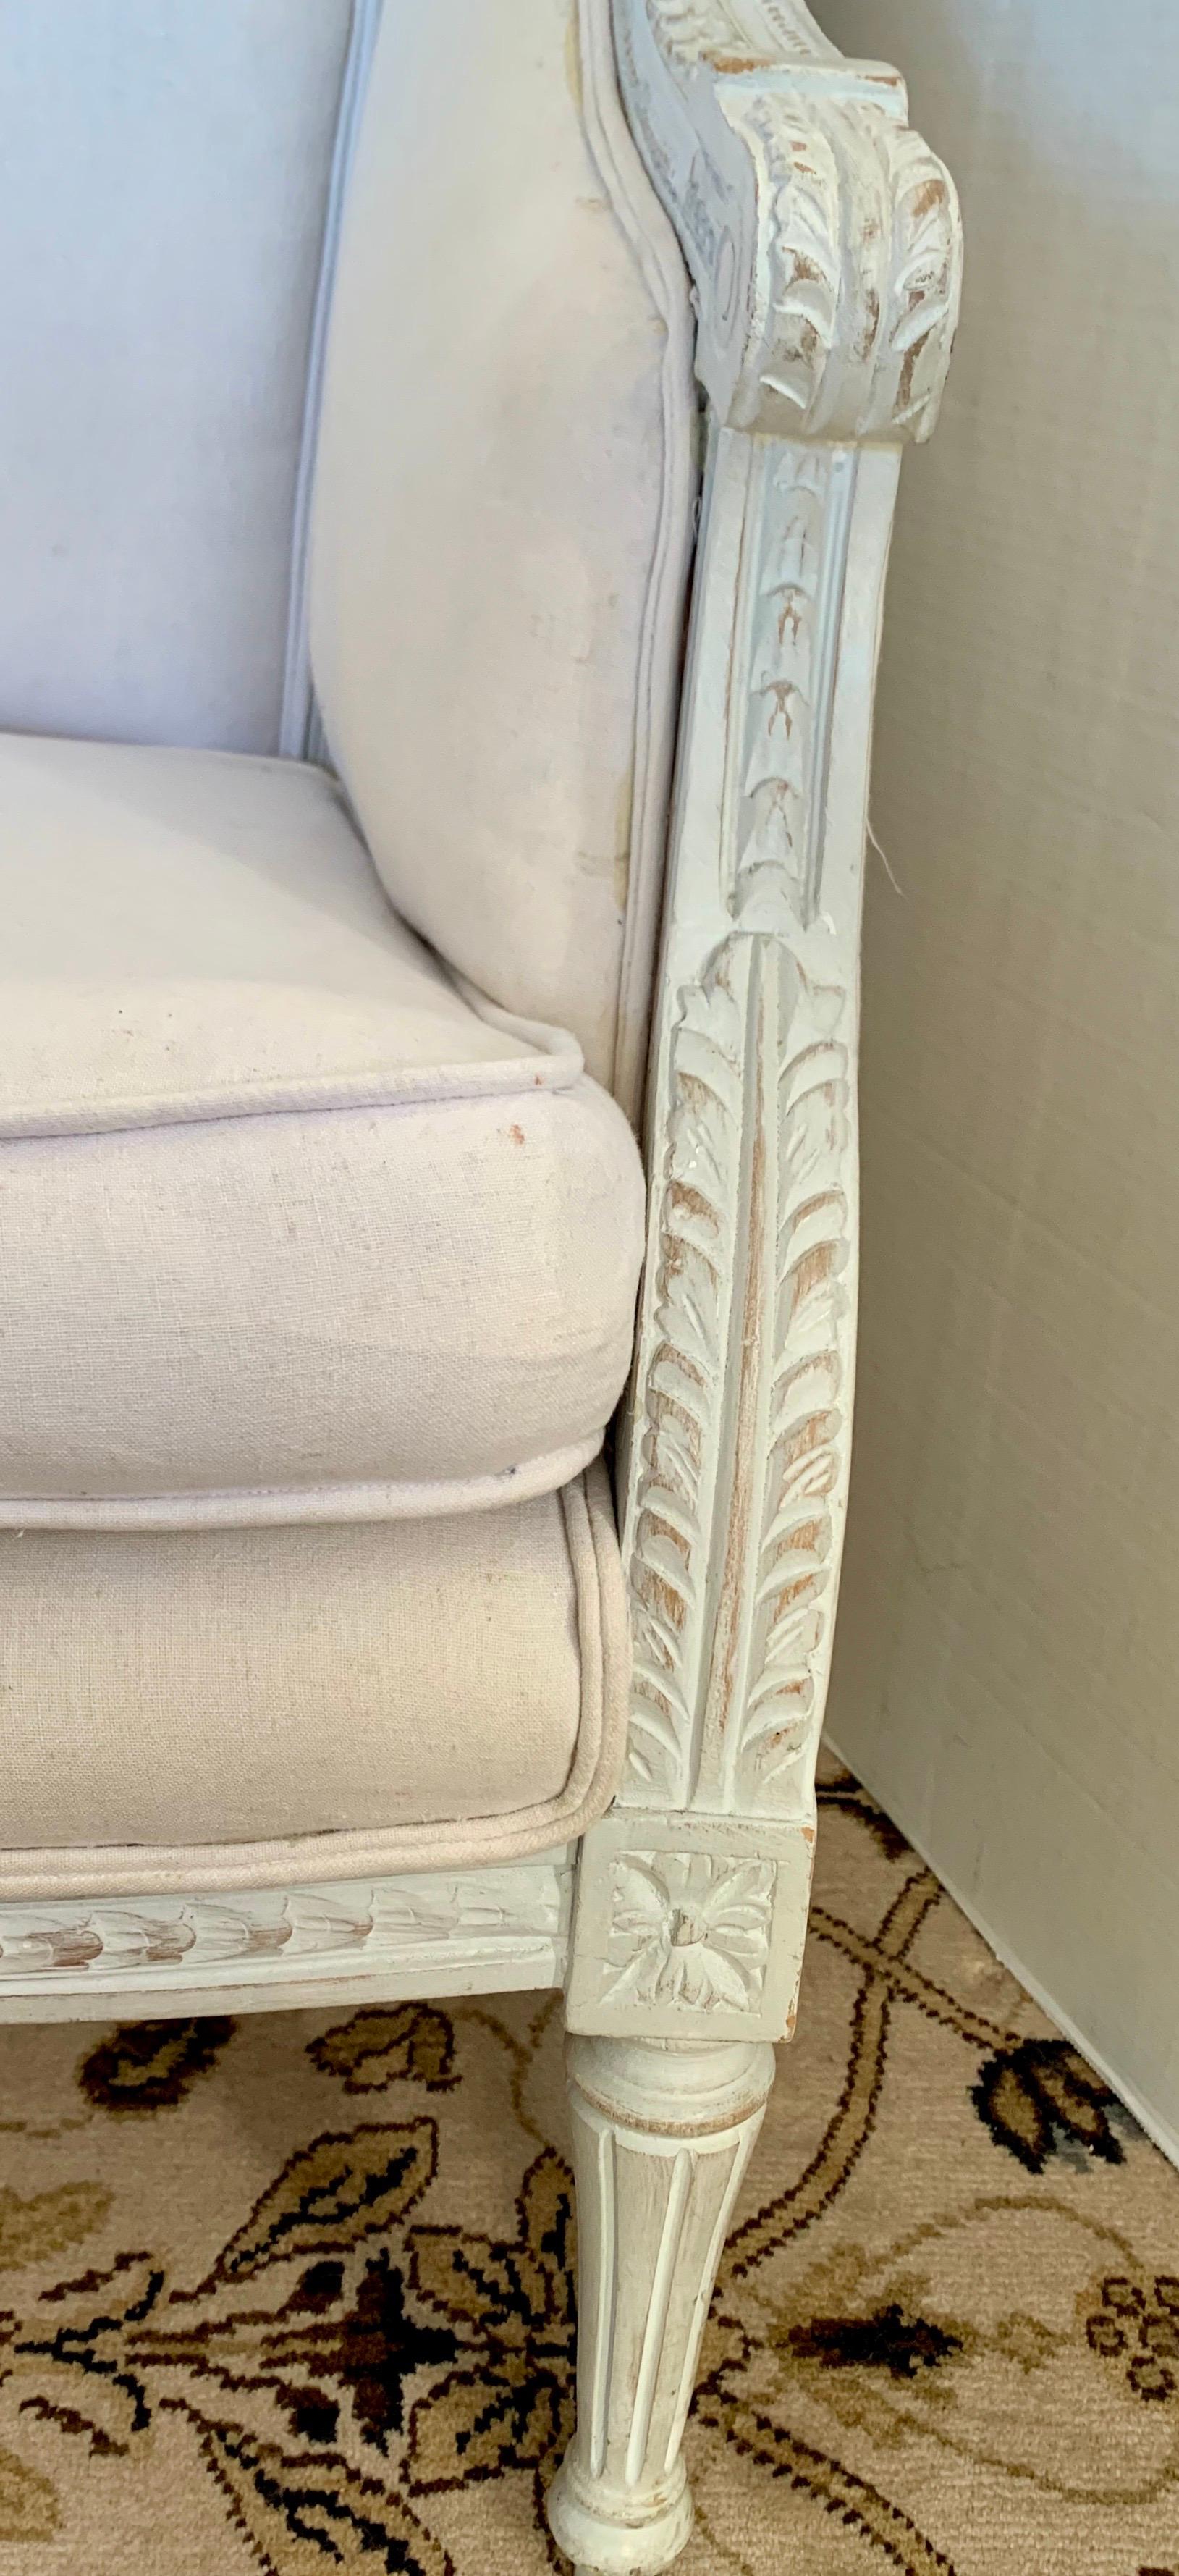 Classic French bergère barrel chairs with beautiful carved details with a white distressed patina.